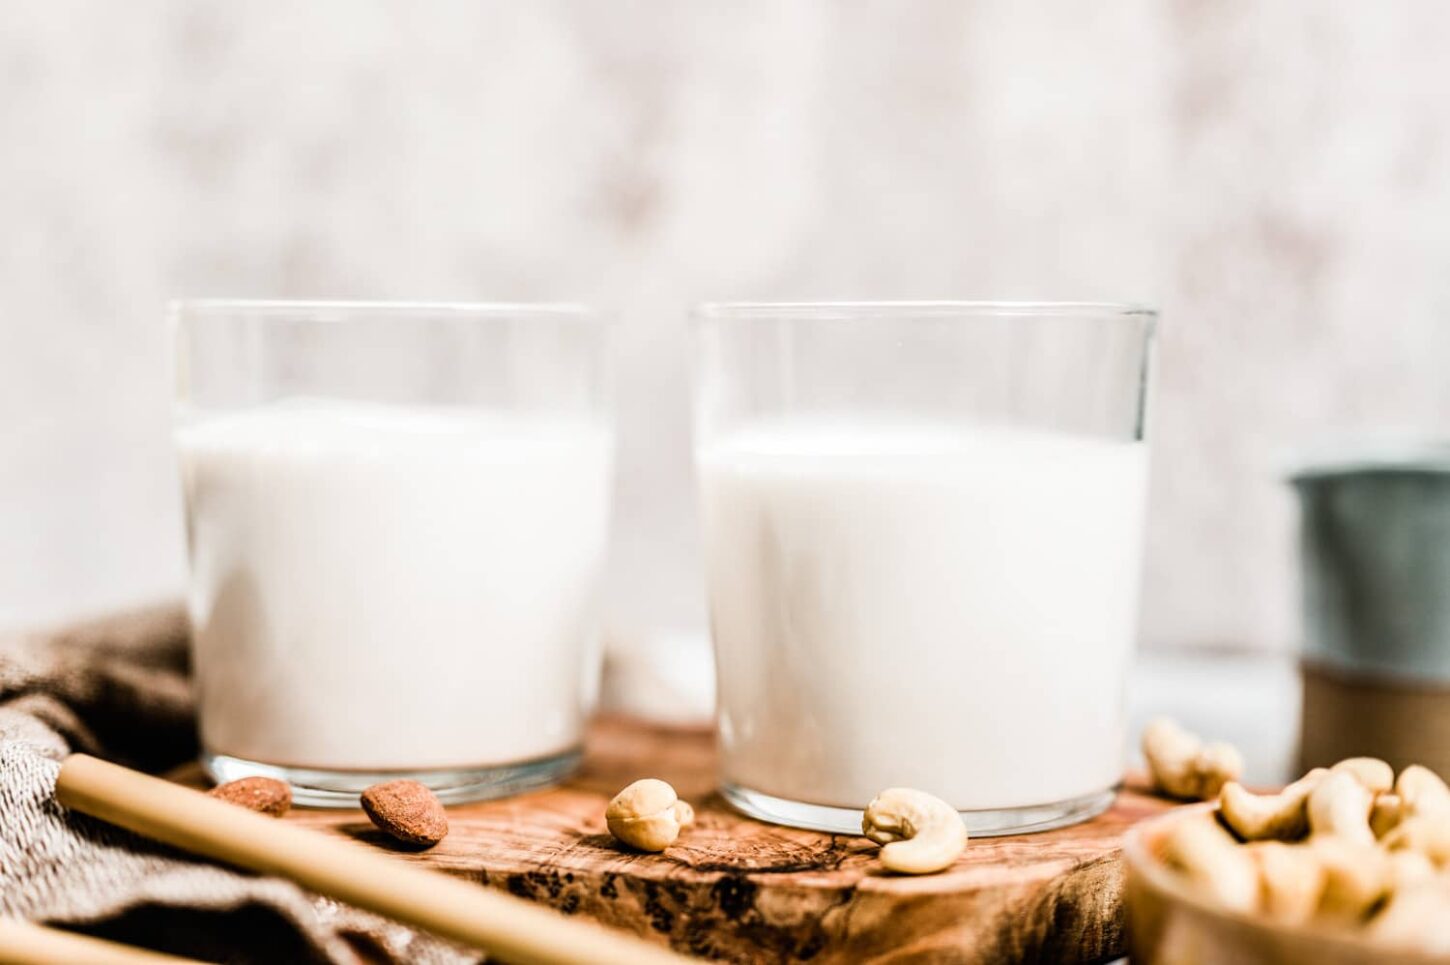 Homemade Almond Milk in Glasses Made With Raw Almonds and Cashews